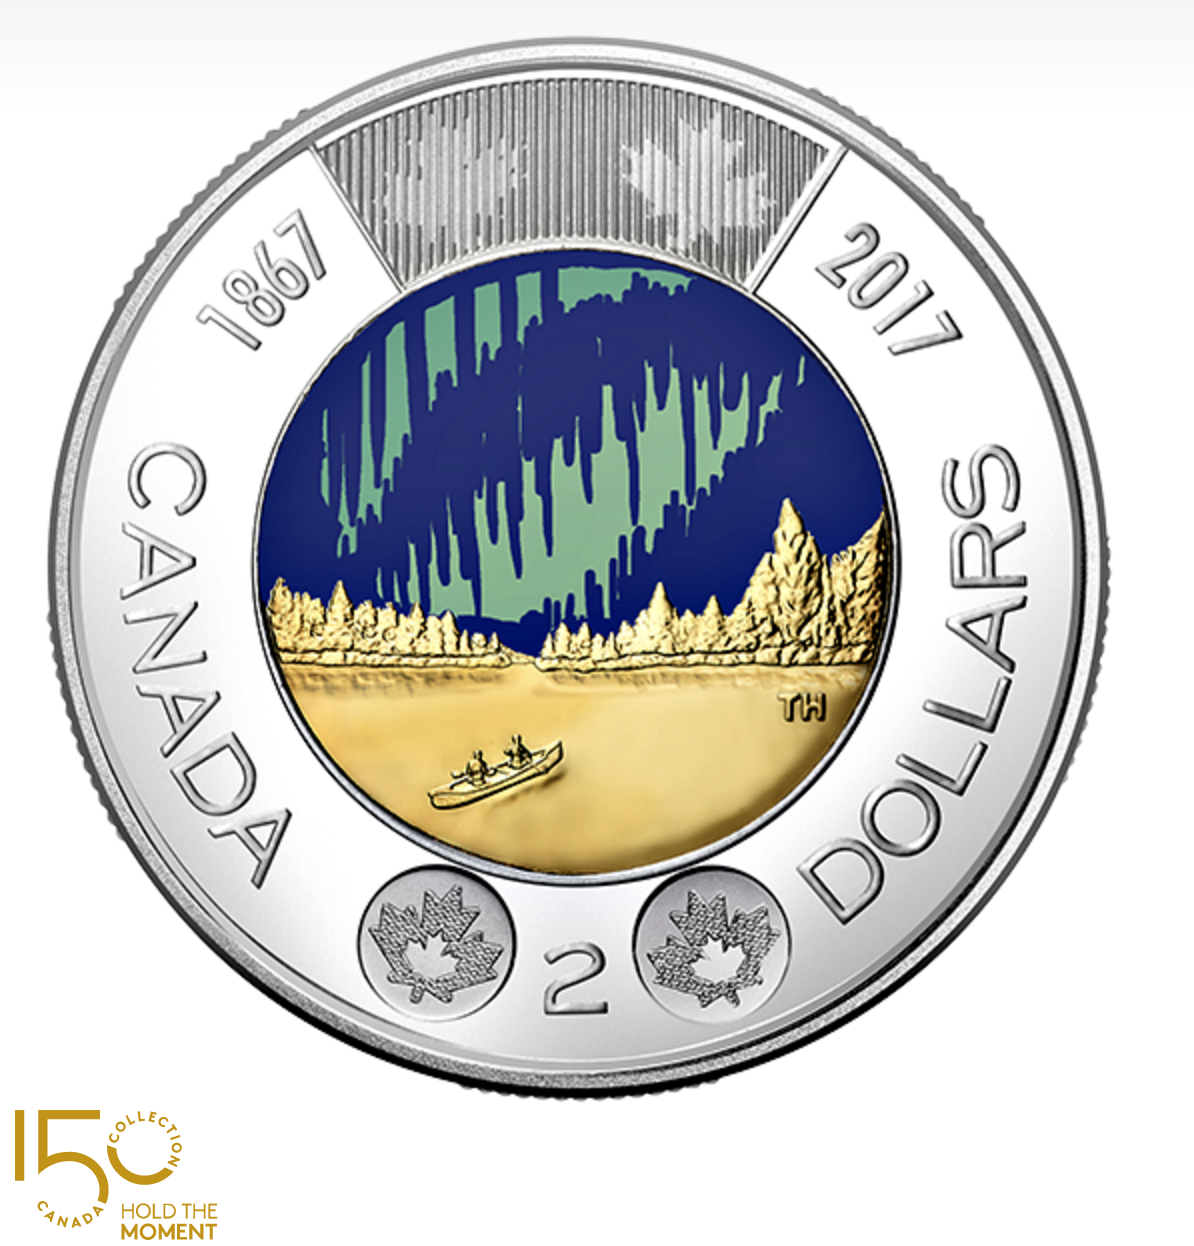 Canada's New $1 Coin Has A Splash Of Colour & The Loonie Honours The 'Queen  Of The Hurricanes' - Narcity